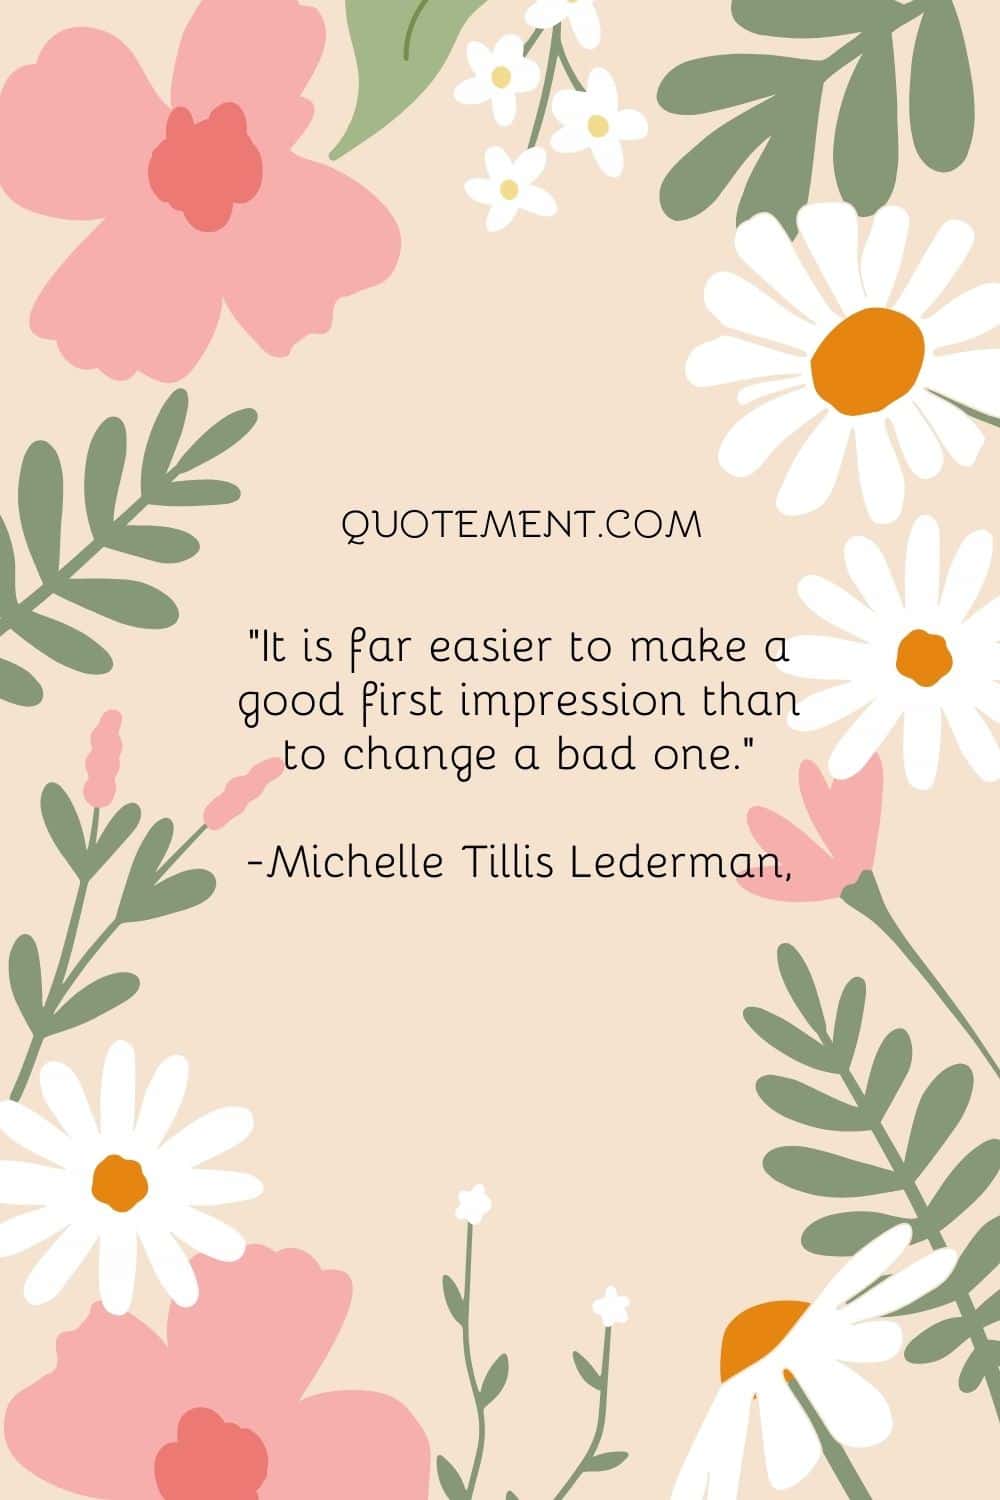 It is far easier to make a good first impression than to change a bad one.